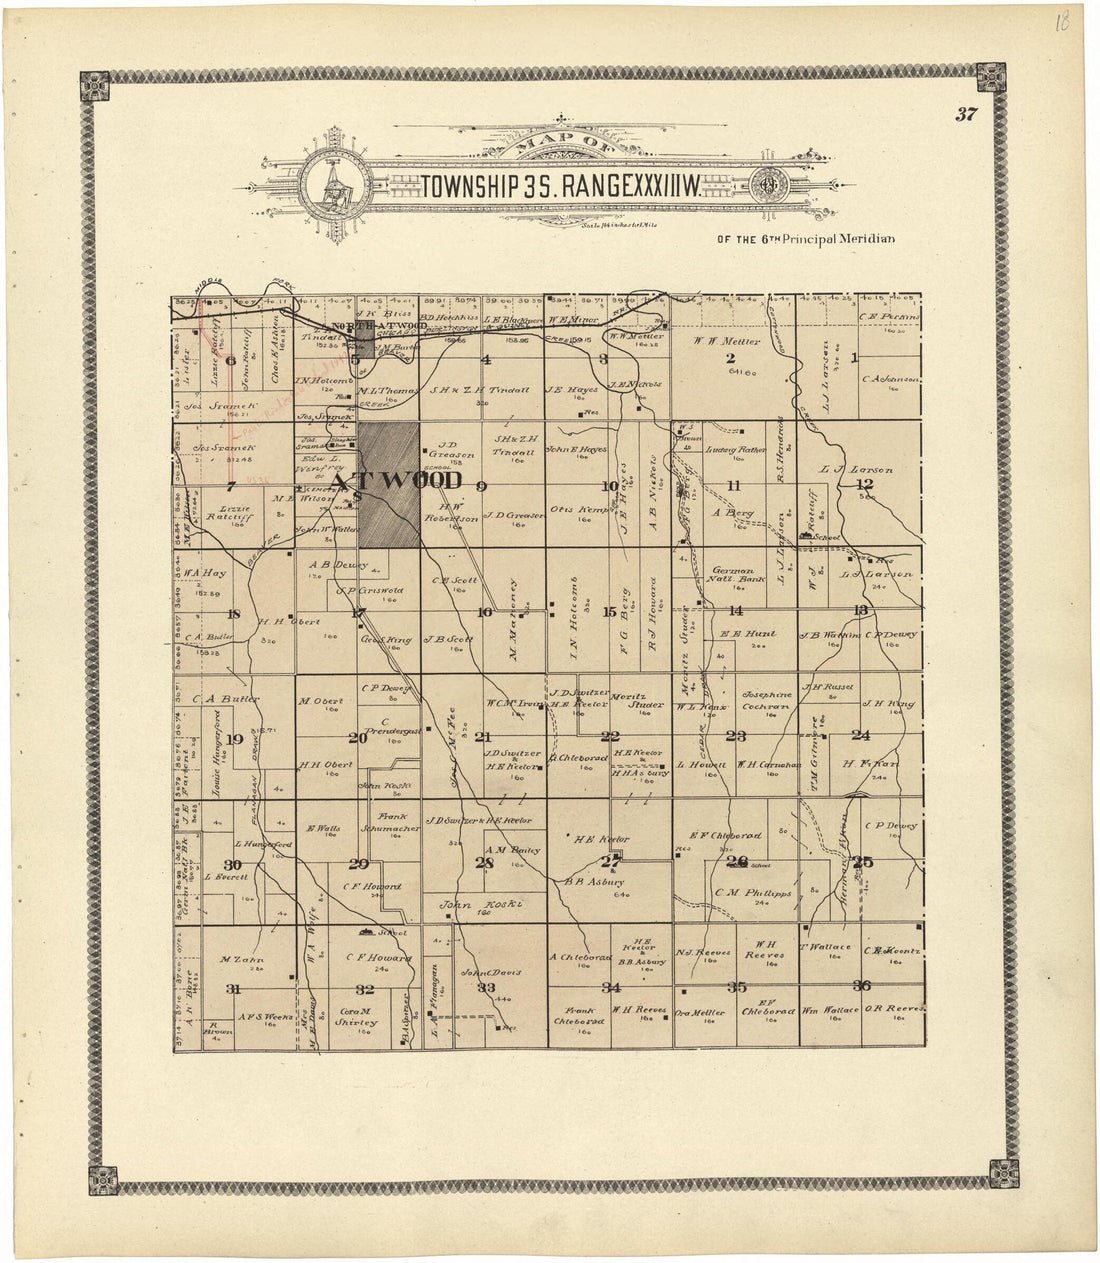 This old map of Map of Township 3 S. Range XXXIII W. from Standard Atlas of Rawlins County, Kansas from 1906 was created by  Geo. A. Ogle &amp; Co in 1906